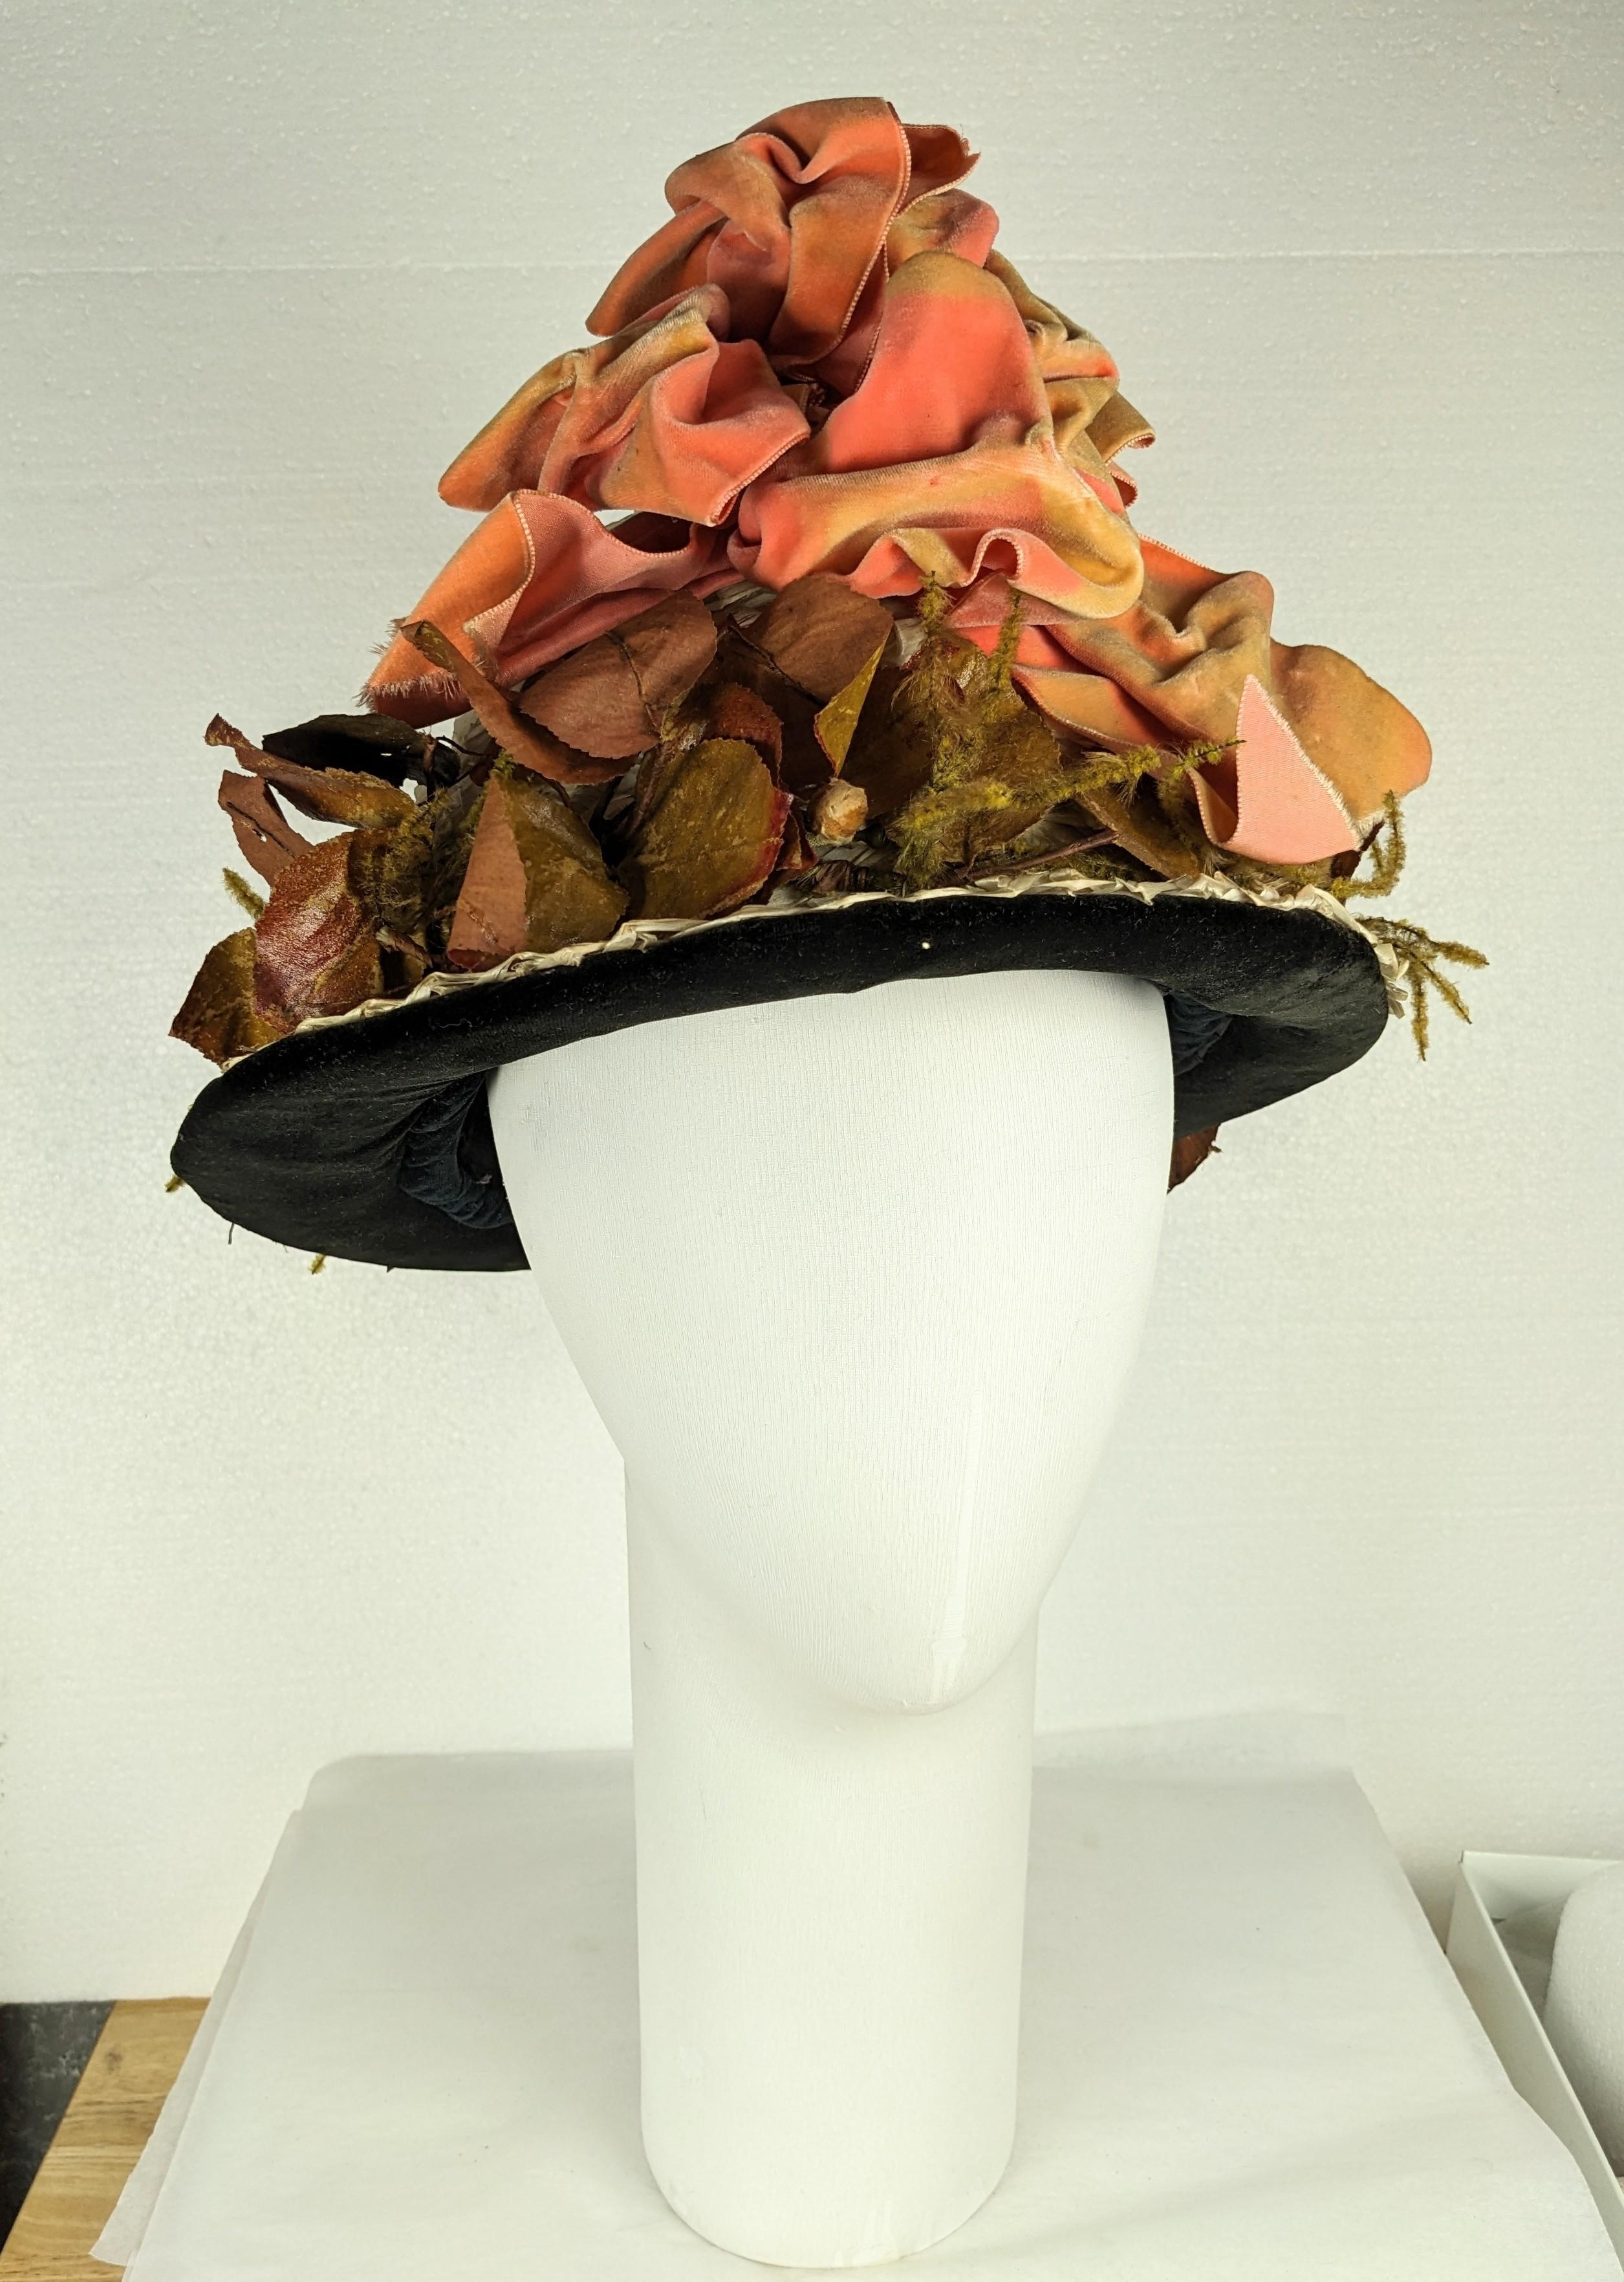 Charming Edwardian hat of natural woven raffia straw circa 1900 trimmed with massive peach silk velvet bow, naturalistic green glazed cotton leaves, and imitation moss stems. Black silk velvet brim, and black taffeta lining. Labelled: The Ideal